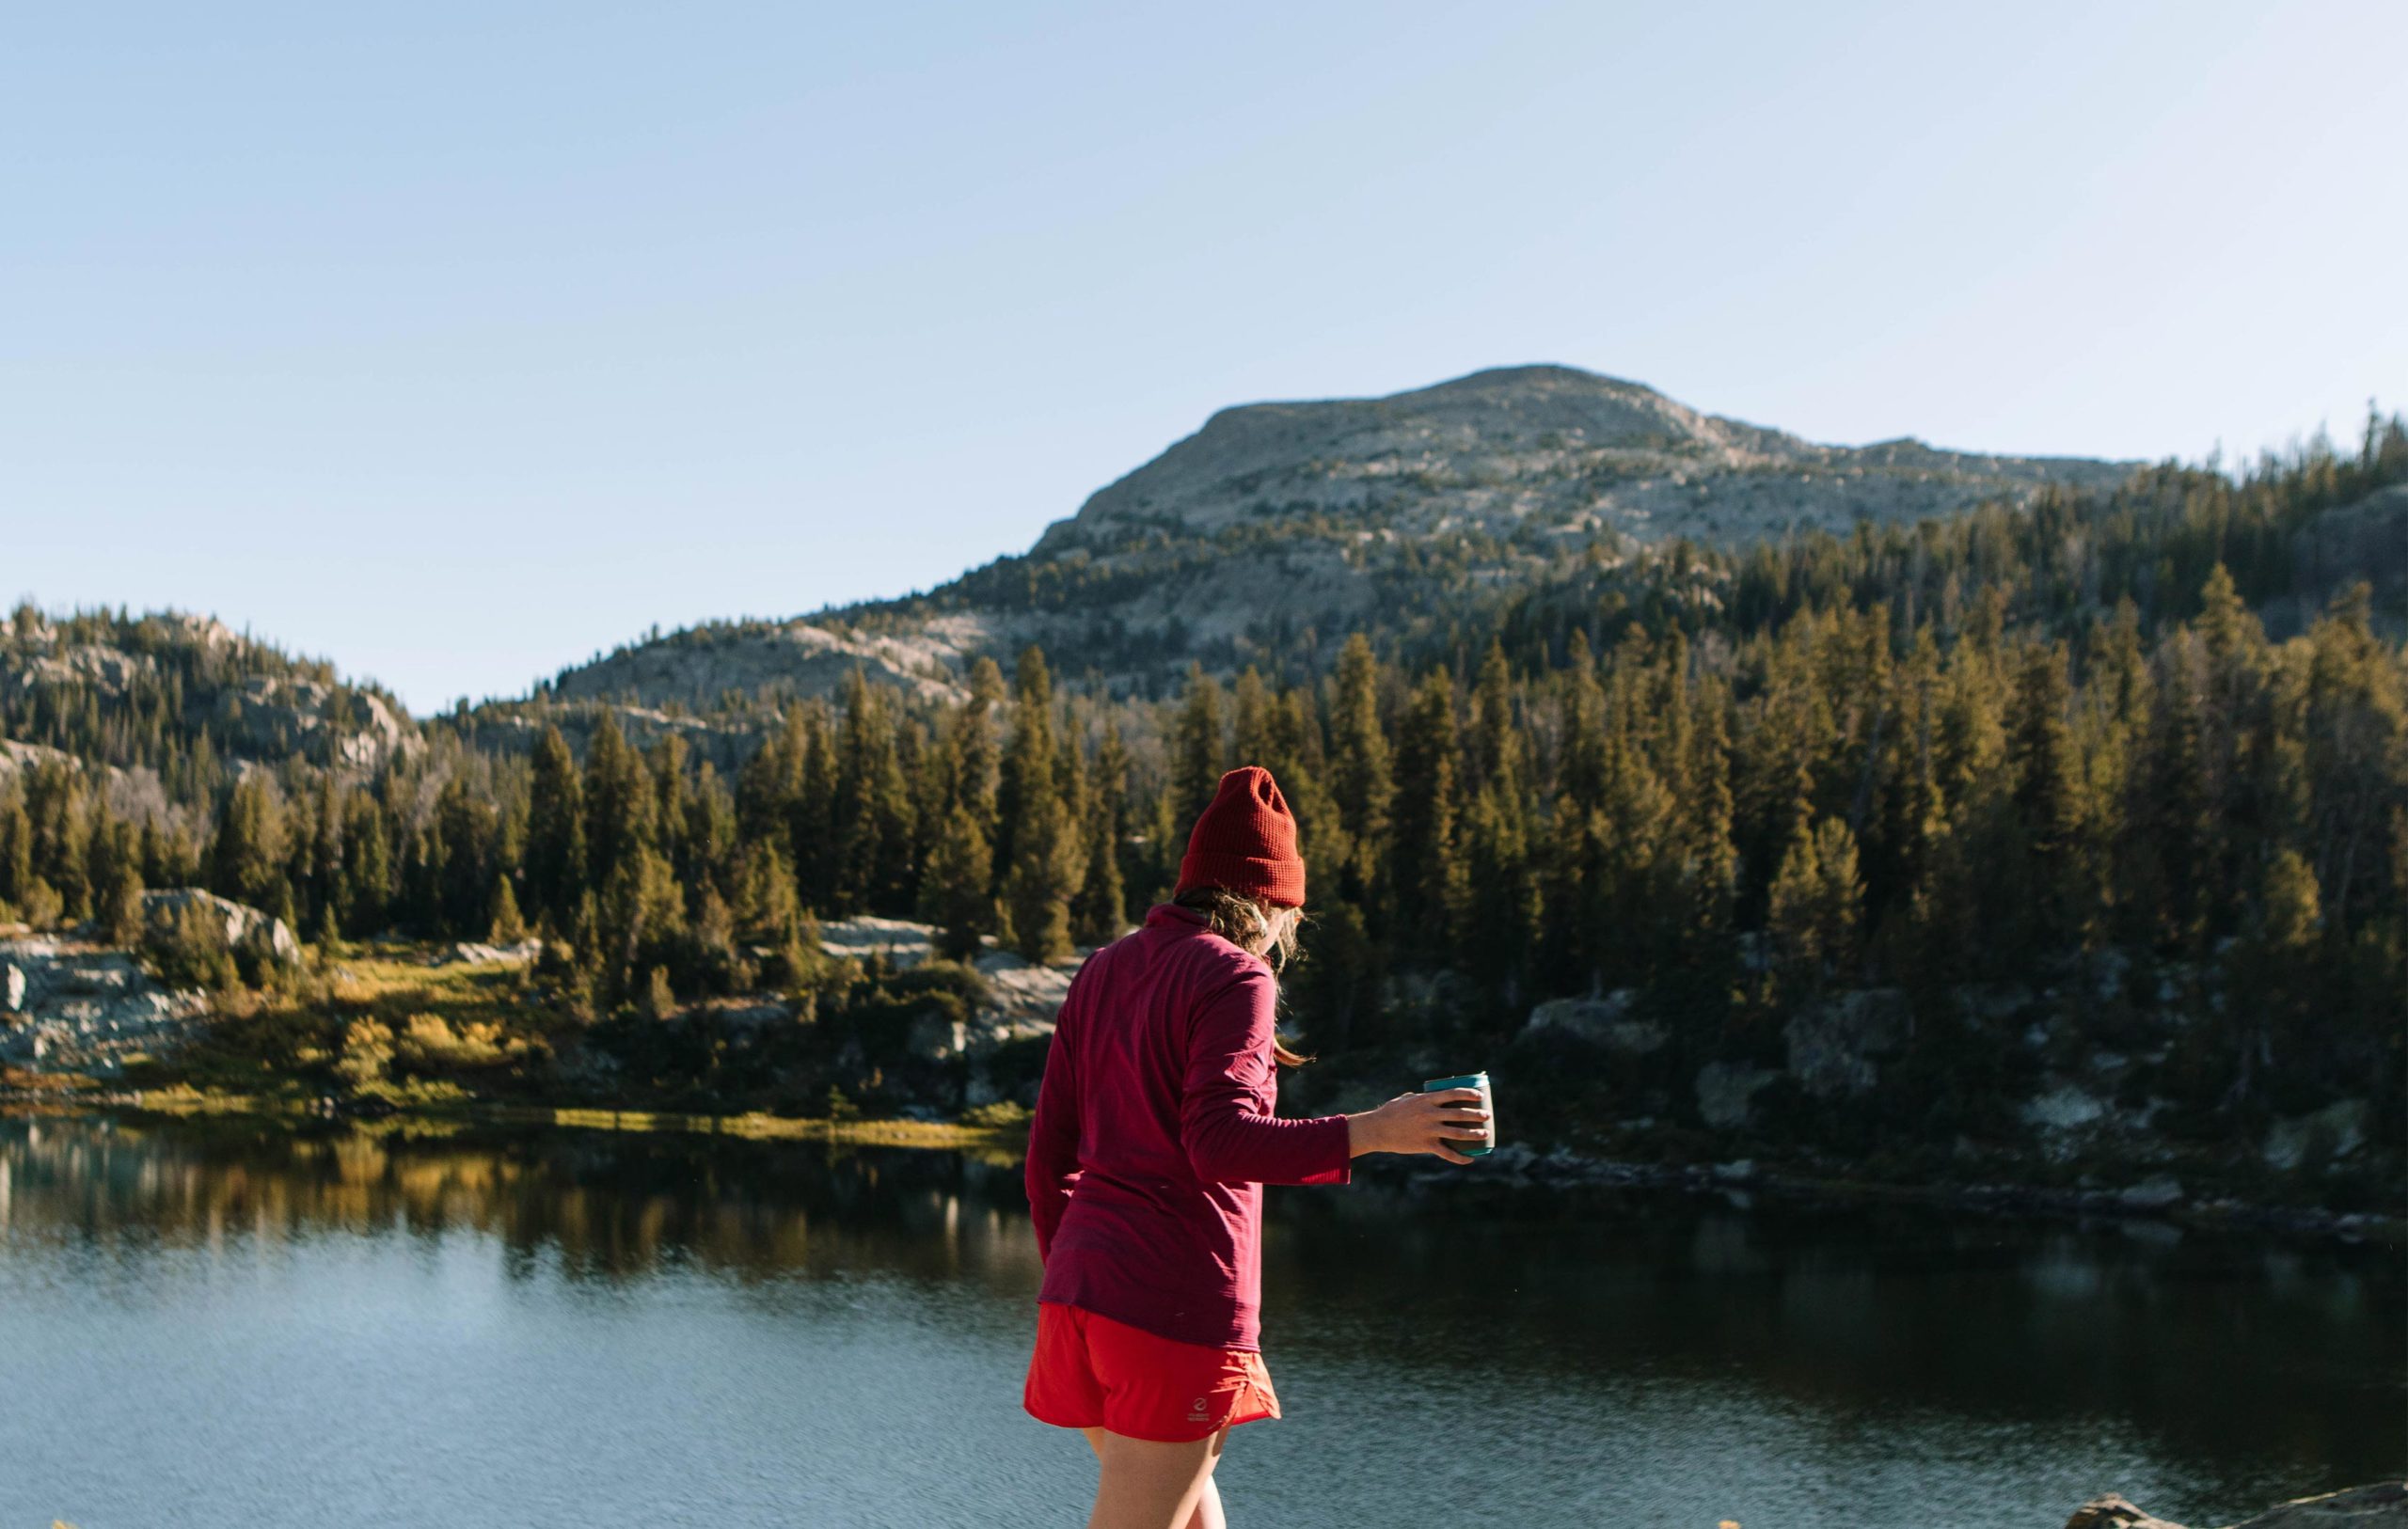 New-Thought-Visit-Pinedale-Wyoming-Ad-Photography-Girl-Wind-River-Range-Backcounty-Lake-fullscreen